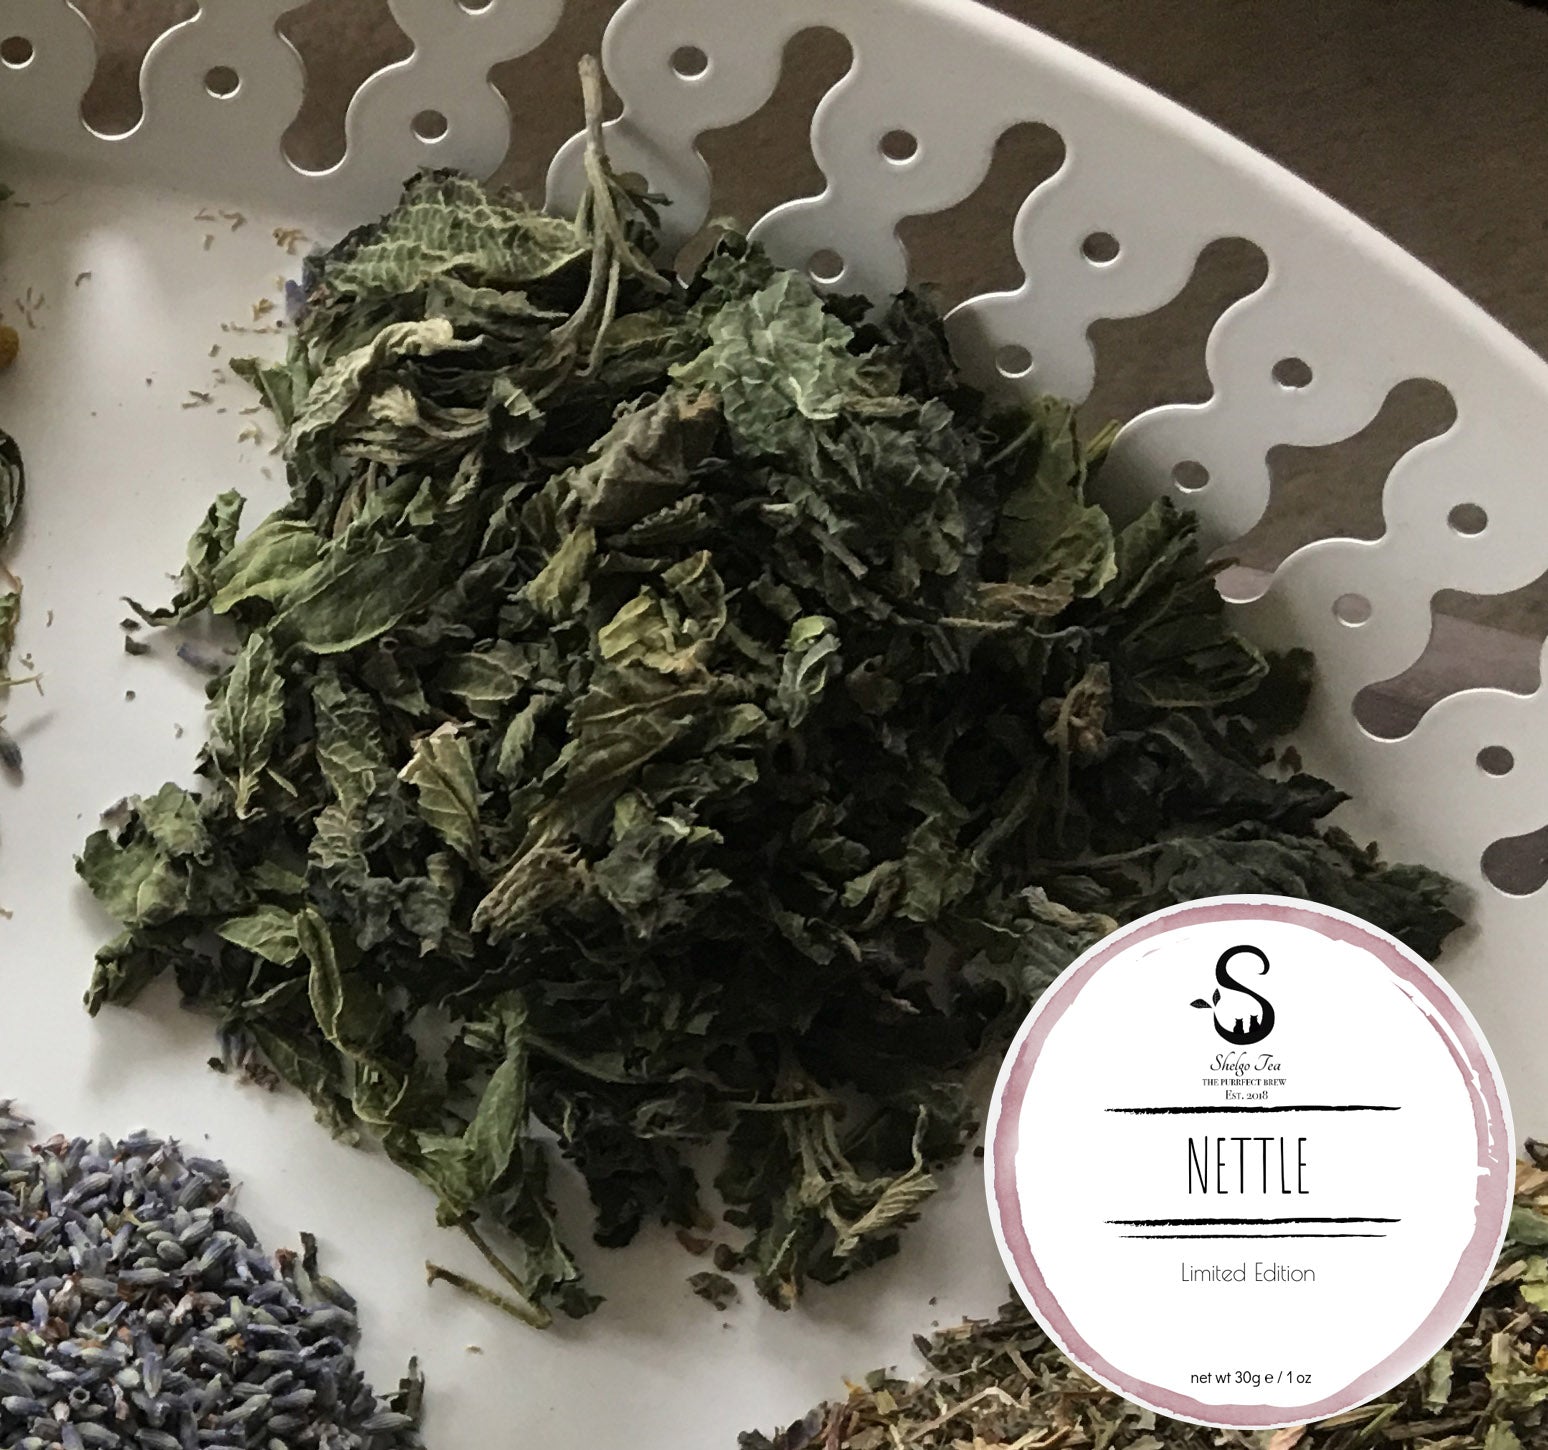 Learn how to brew nettle tea safely with Shelgo Tea.